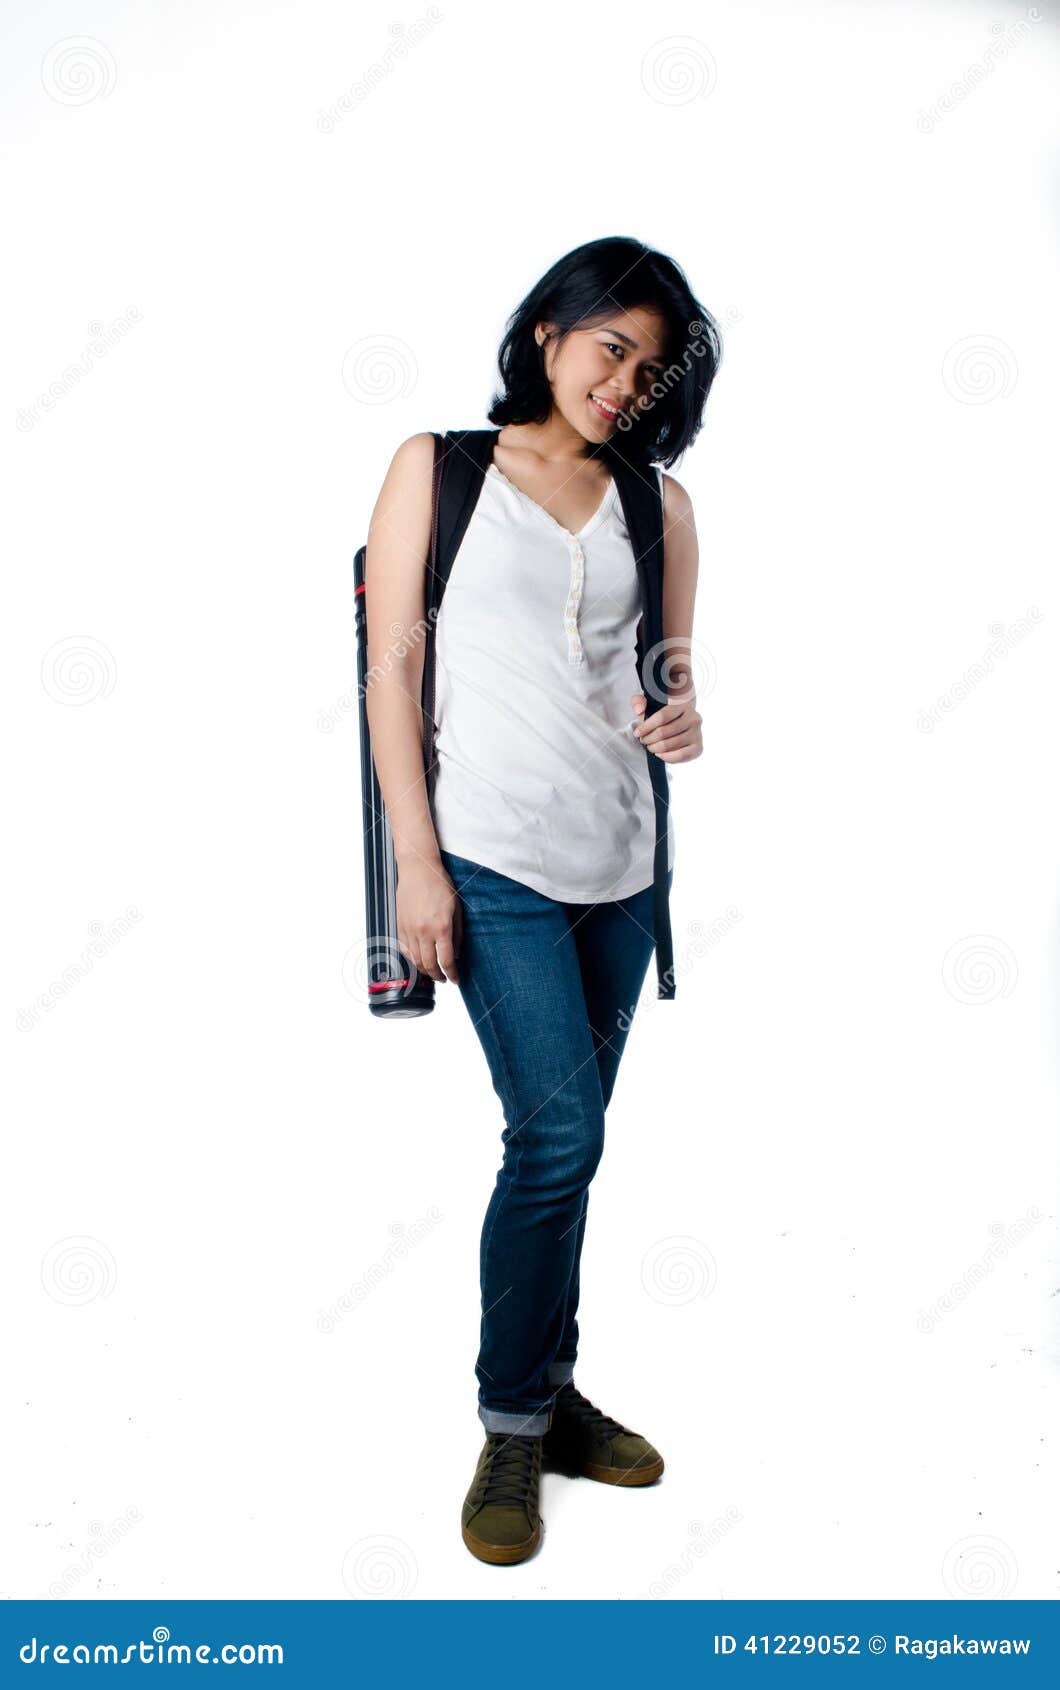 Smart and Beauty College Girl with Blueprint Tube Carrier Stock